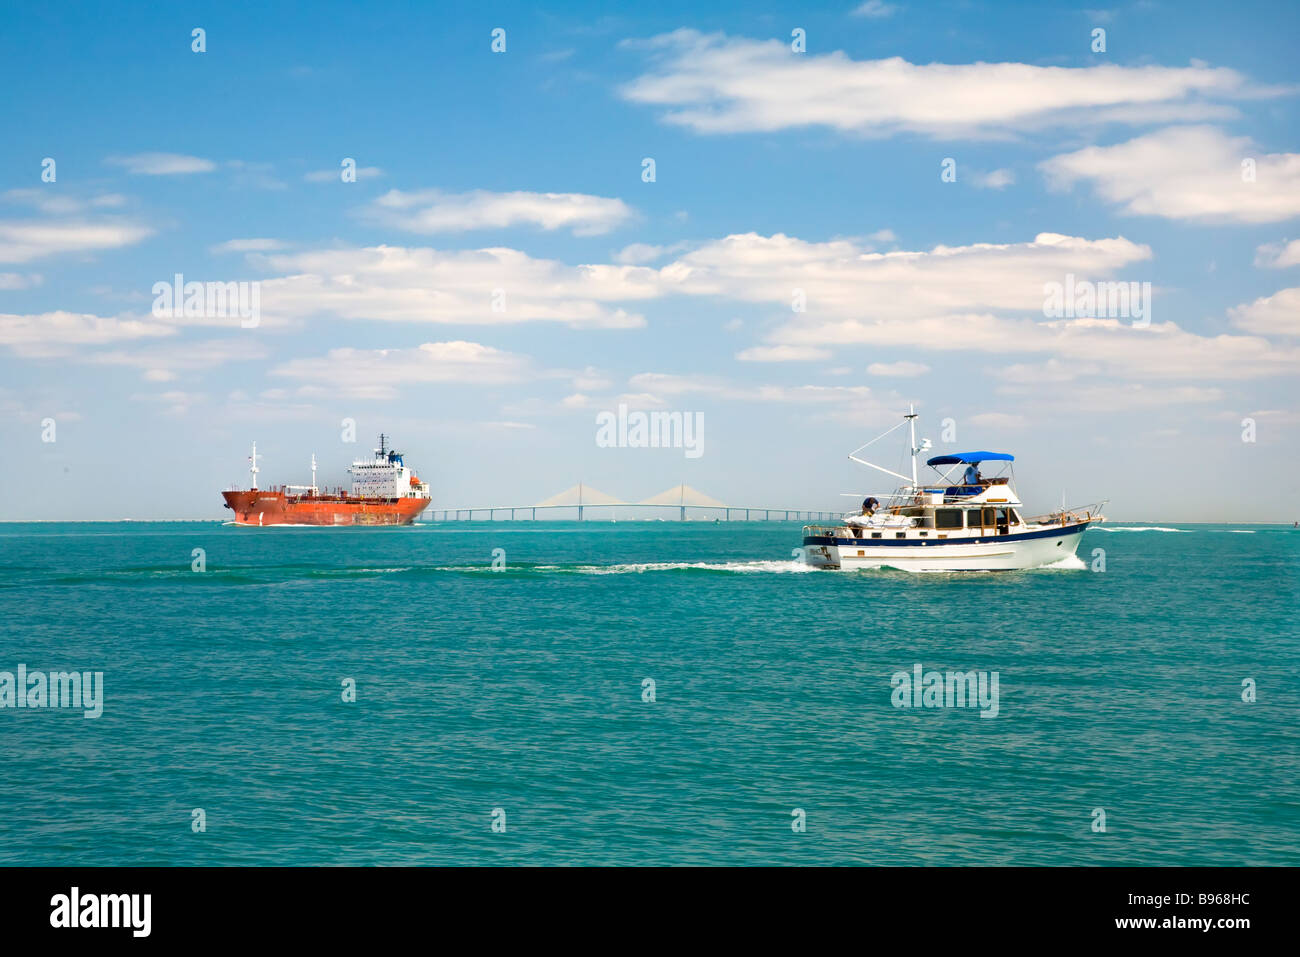 Freighter and pleasure boat in entrance to Tampa Bay from Gulf of Mexico Stock Photo